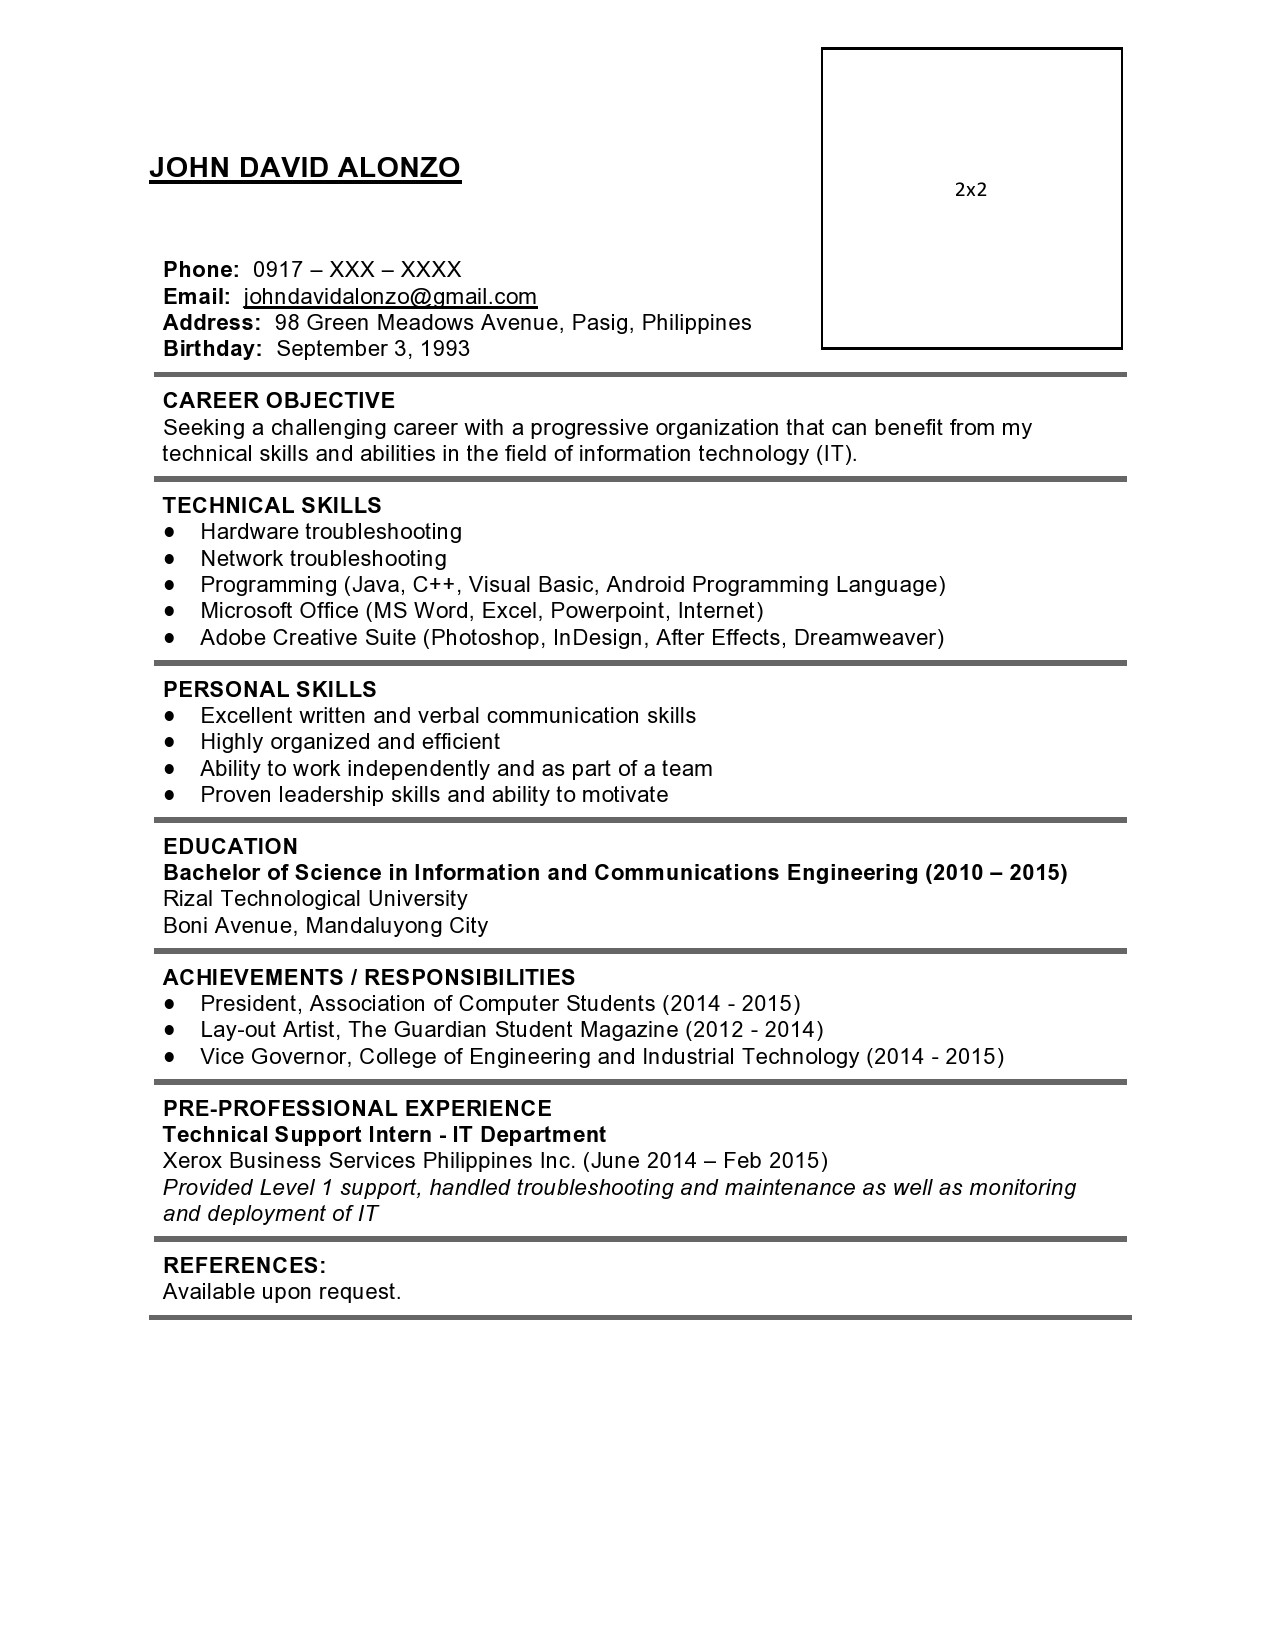 Sample Resume for Nurses Applicants In the Philippines Sample Resume formats for Fresh Graduates